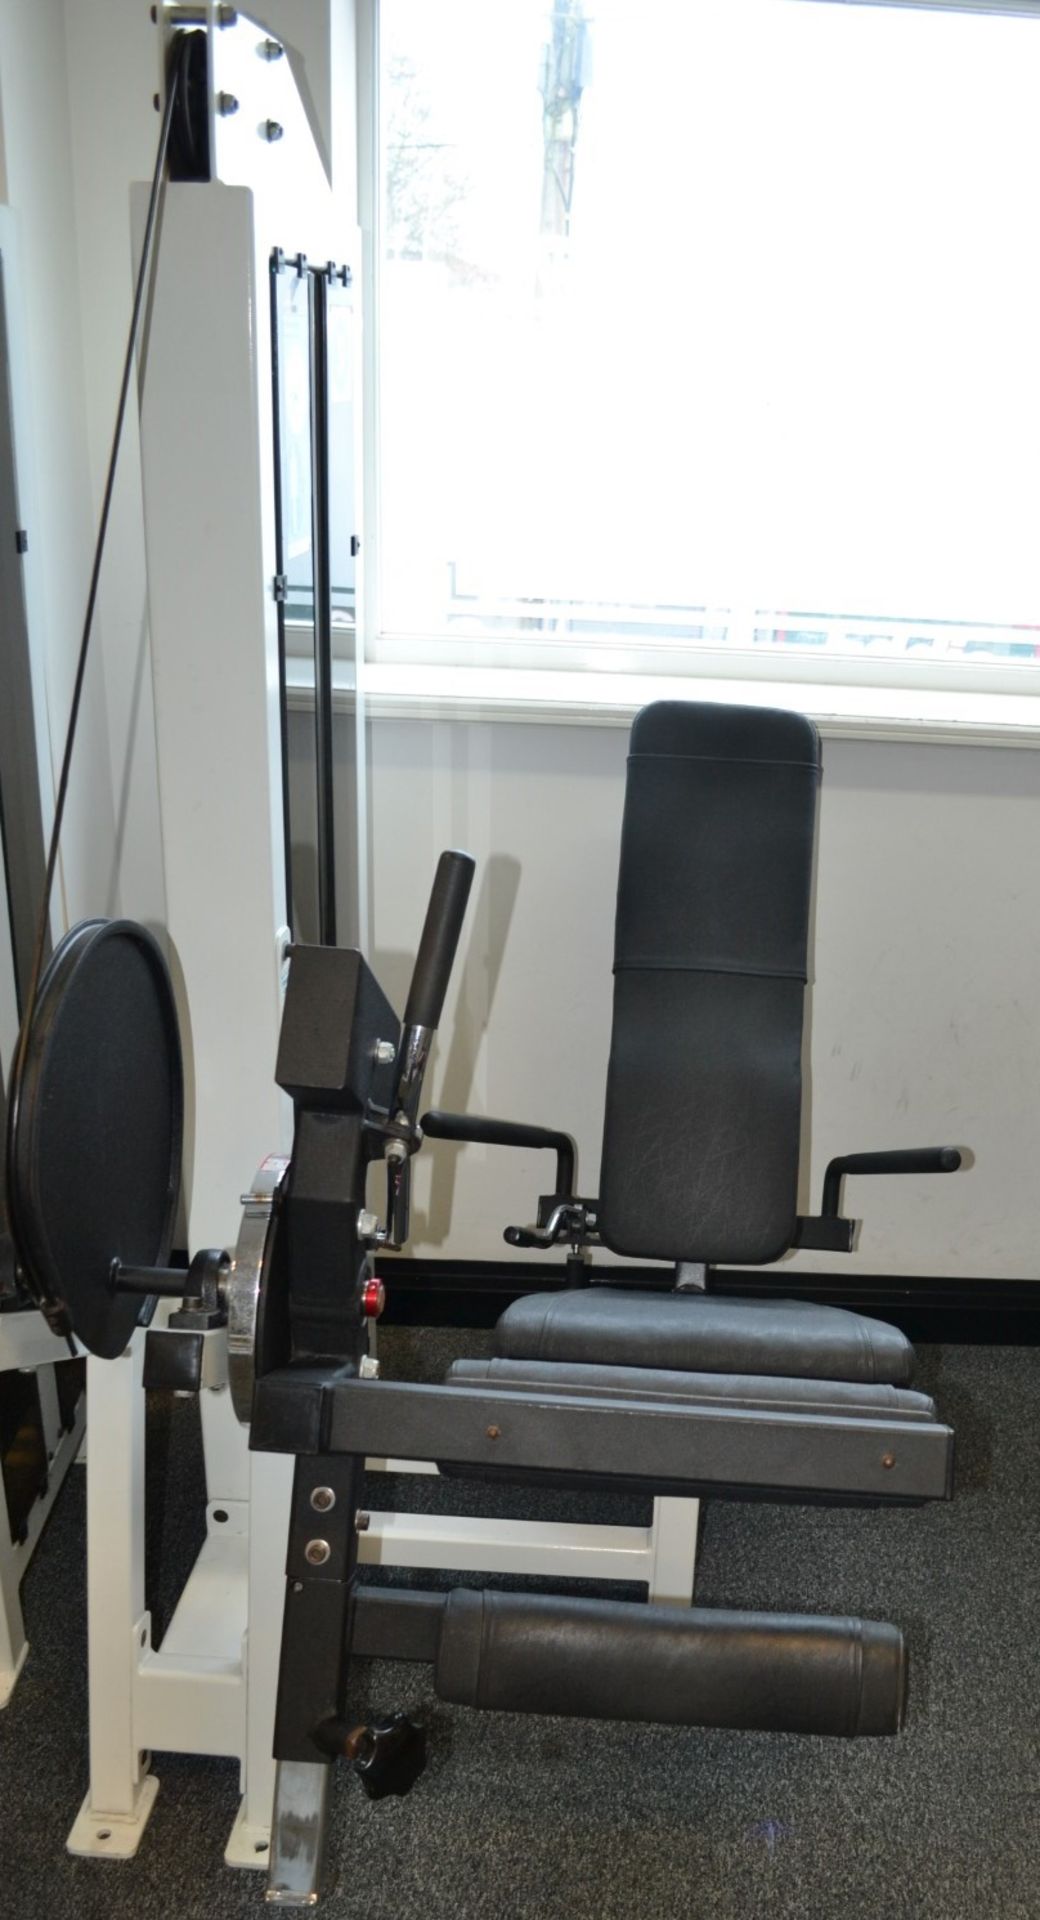 1 x Force Seated Leg Curl Pin Loaded Gym Machine With 100kg Weights - Ref: J2027 - Image 2 of 4